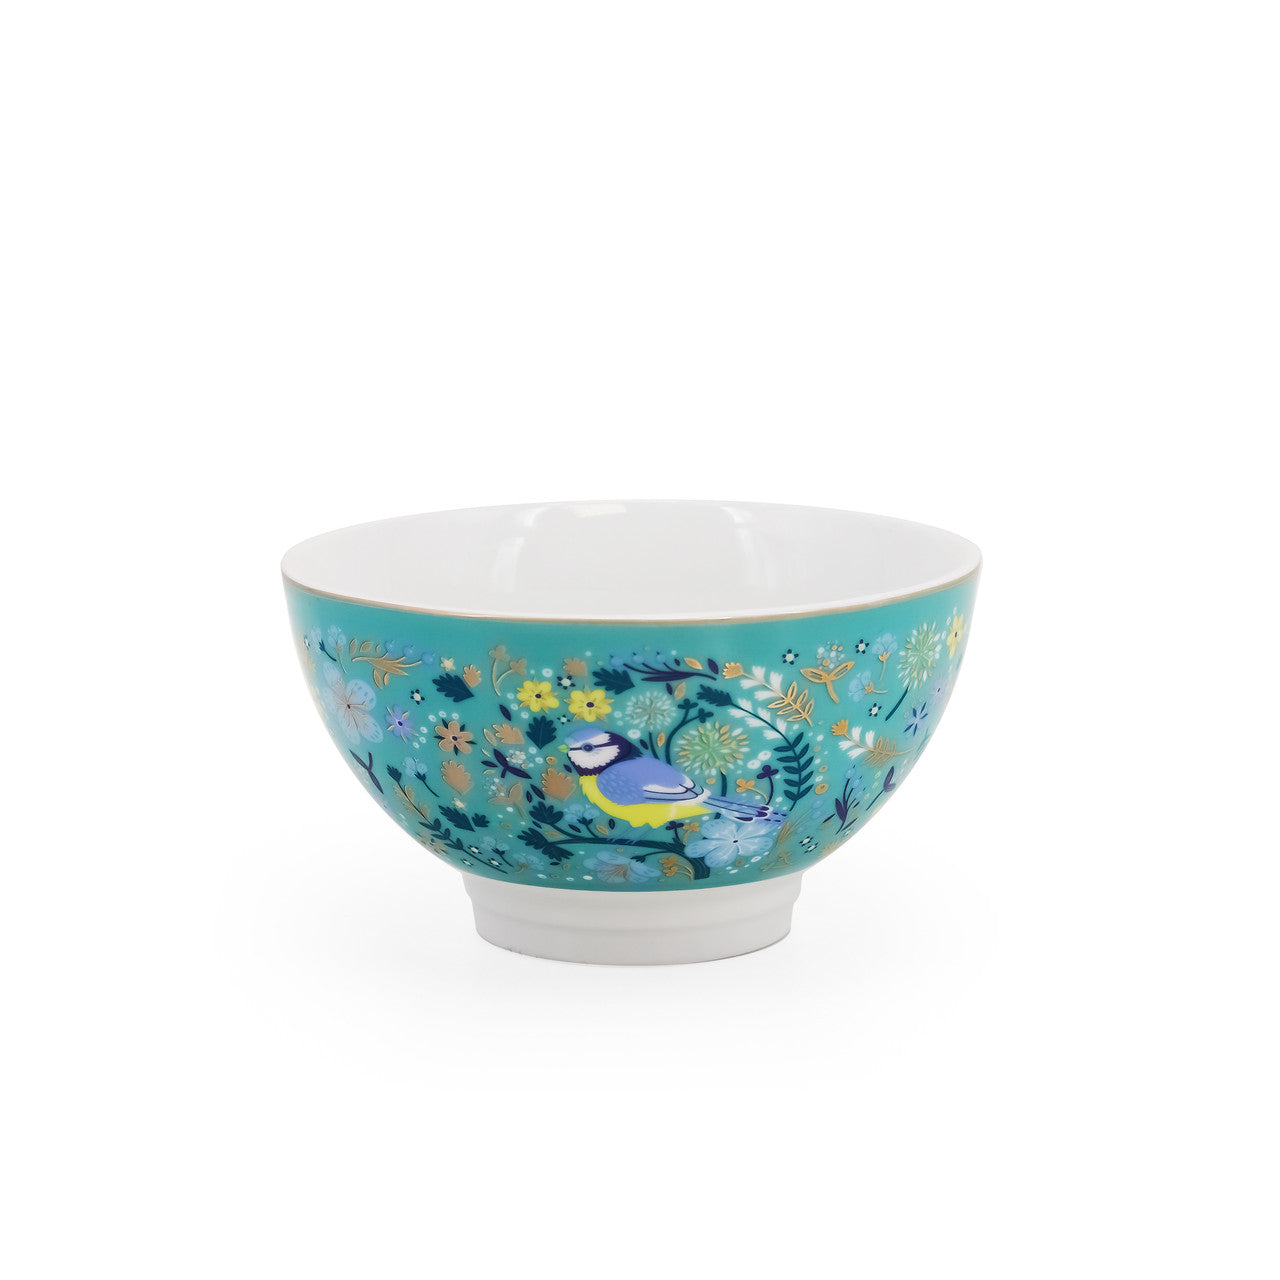 Tipperary Crystal Birdy Cereal Bowls Set of 4  - New 2022  New to our collection, this set of 4 cereal bowls come beautifully illustrated and presented in a rigid Tipperary Crystal gift box. Makes a wonderful gift to be enjoyed.  The Birdy Collection is a series of 6 exclusively commissioned illustrations inspired by native Irish birds; Bullfinch, Goldfinch, Blue tit, Greenfinch, Kingfisher and Robin.